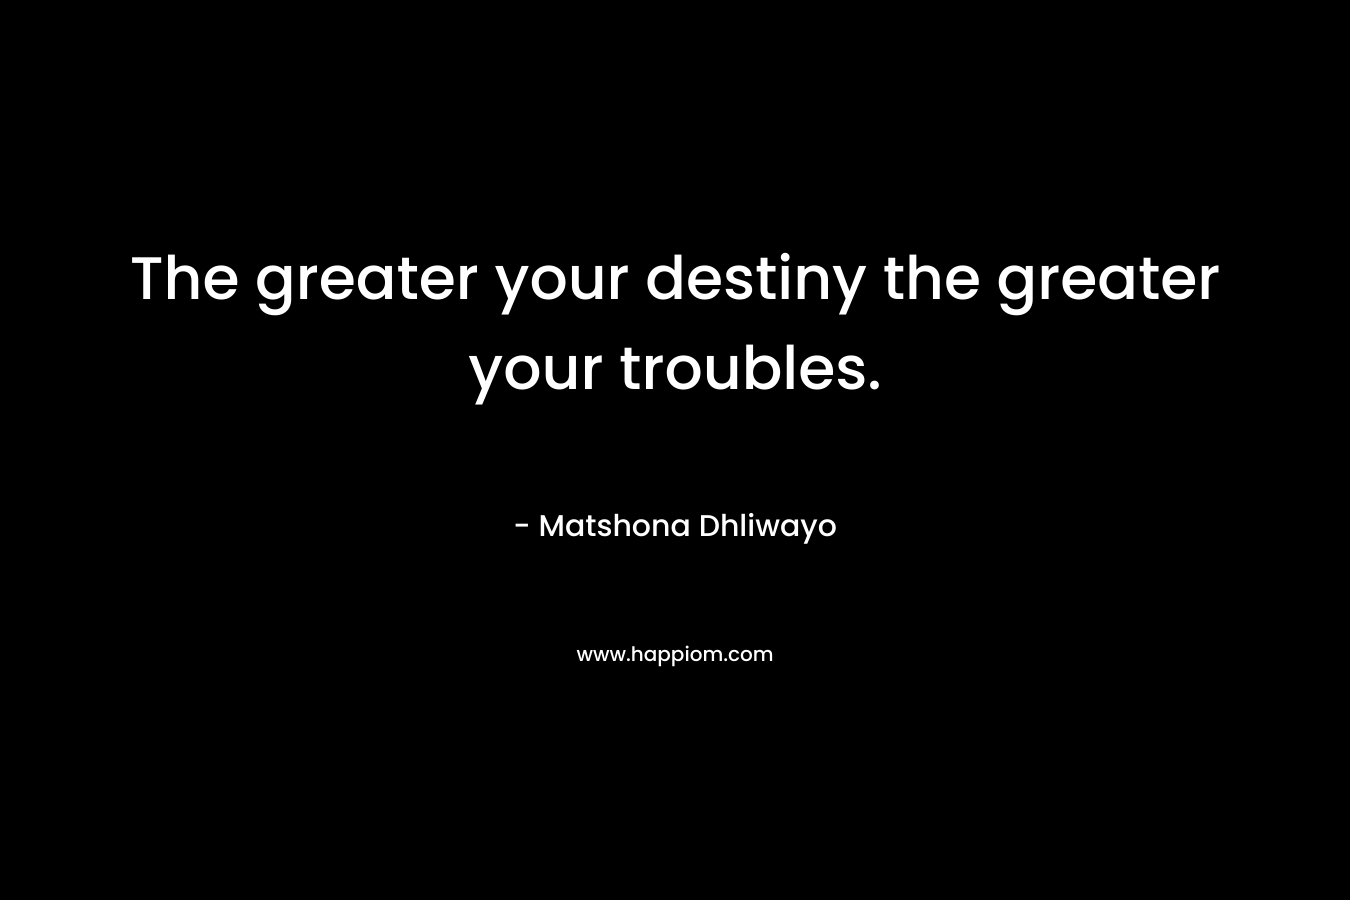 The greater your destiny the greater your troubles.